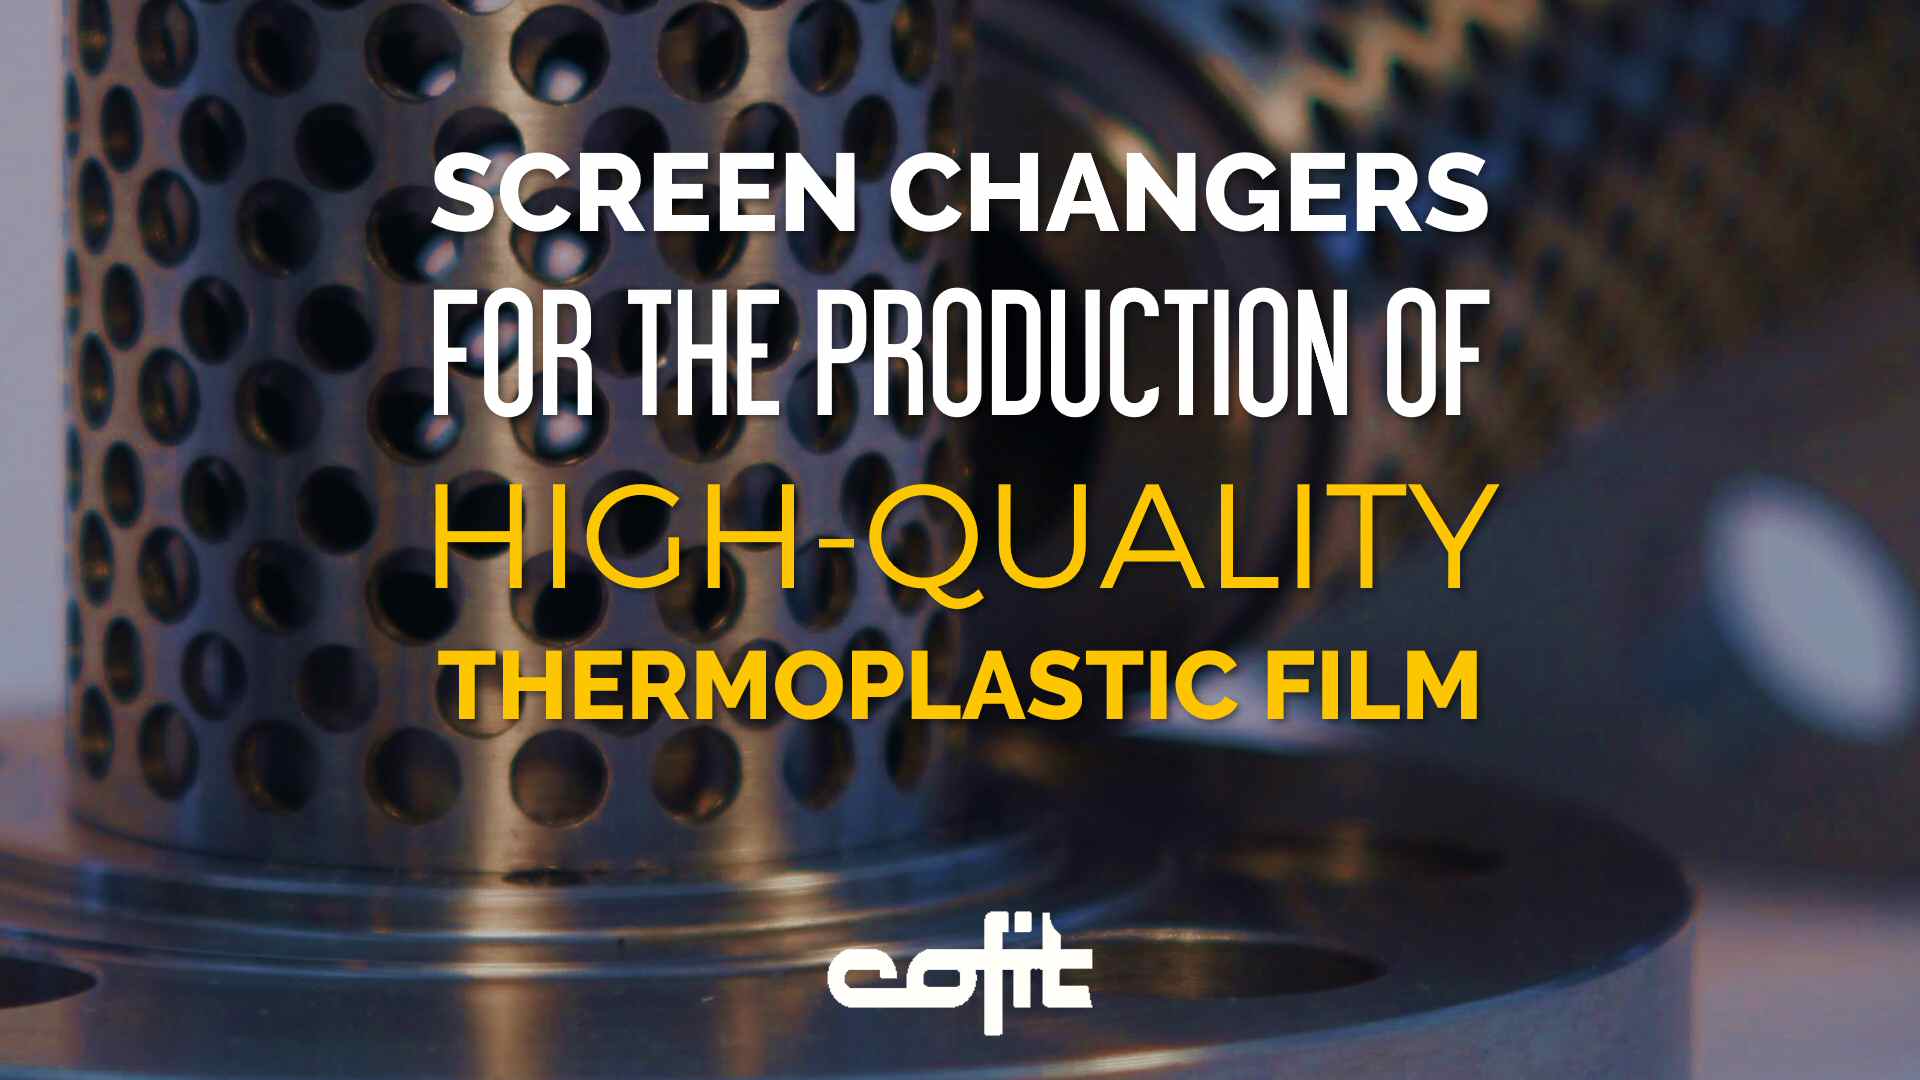 Screen changers for the production of high-quality thermoplastic film